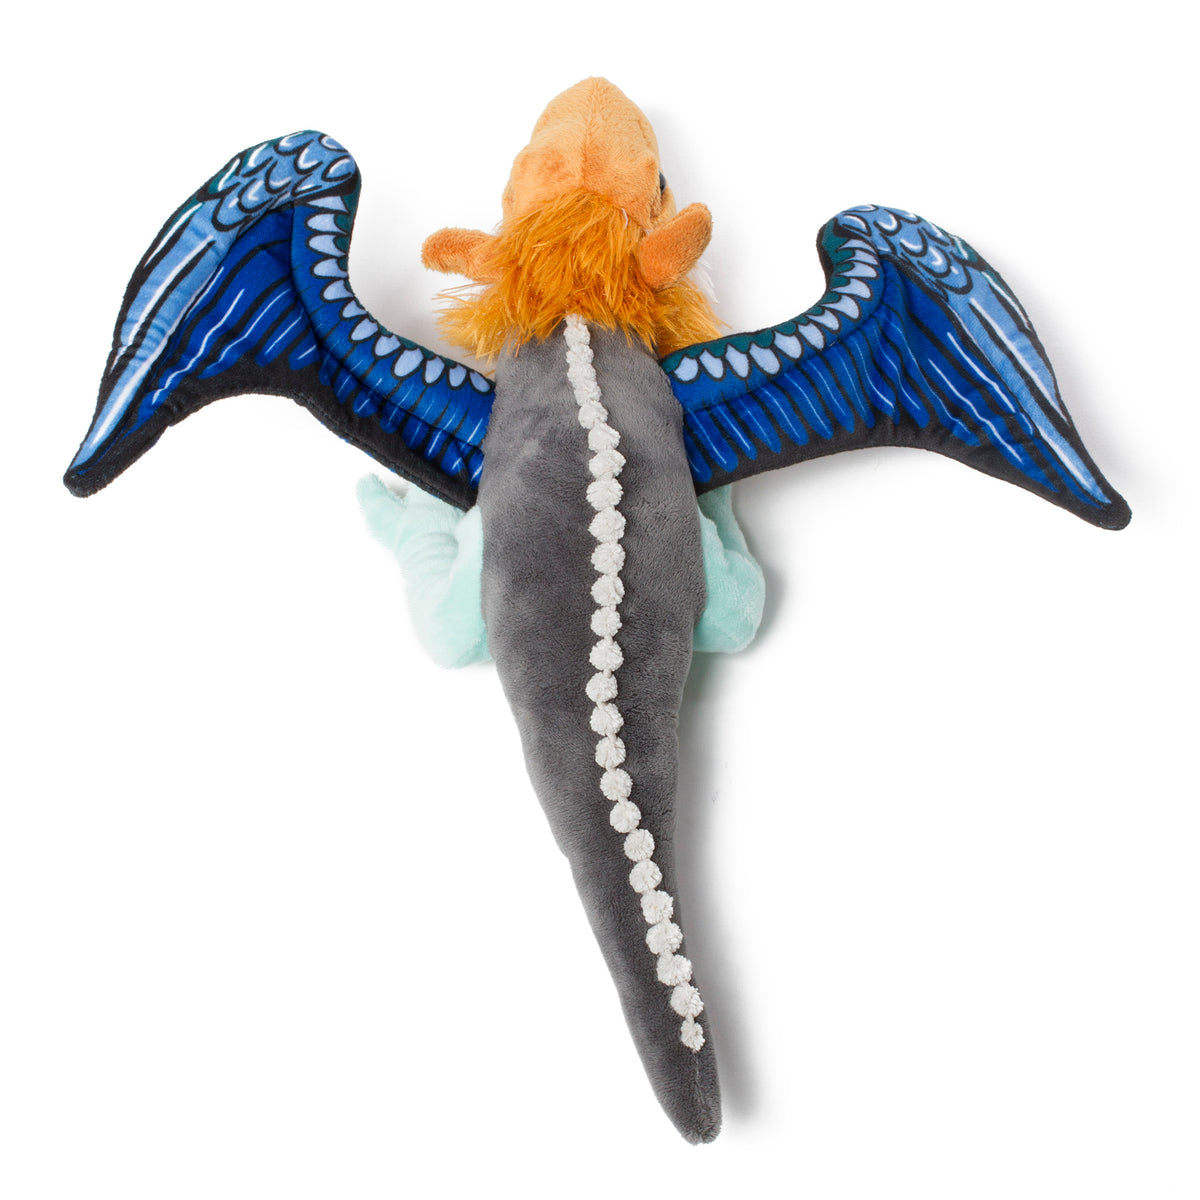 Plush Dragon Inspired by Illuminated Manuscript Bestiary- Top View  | Getty Store